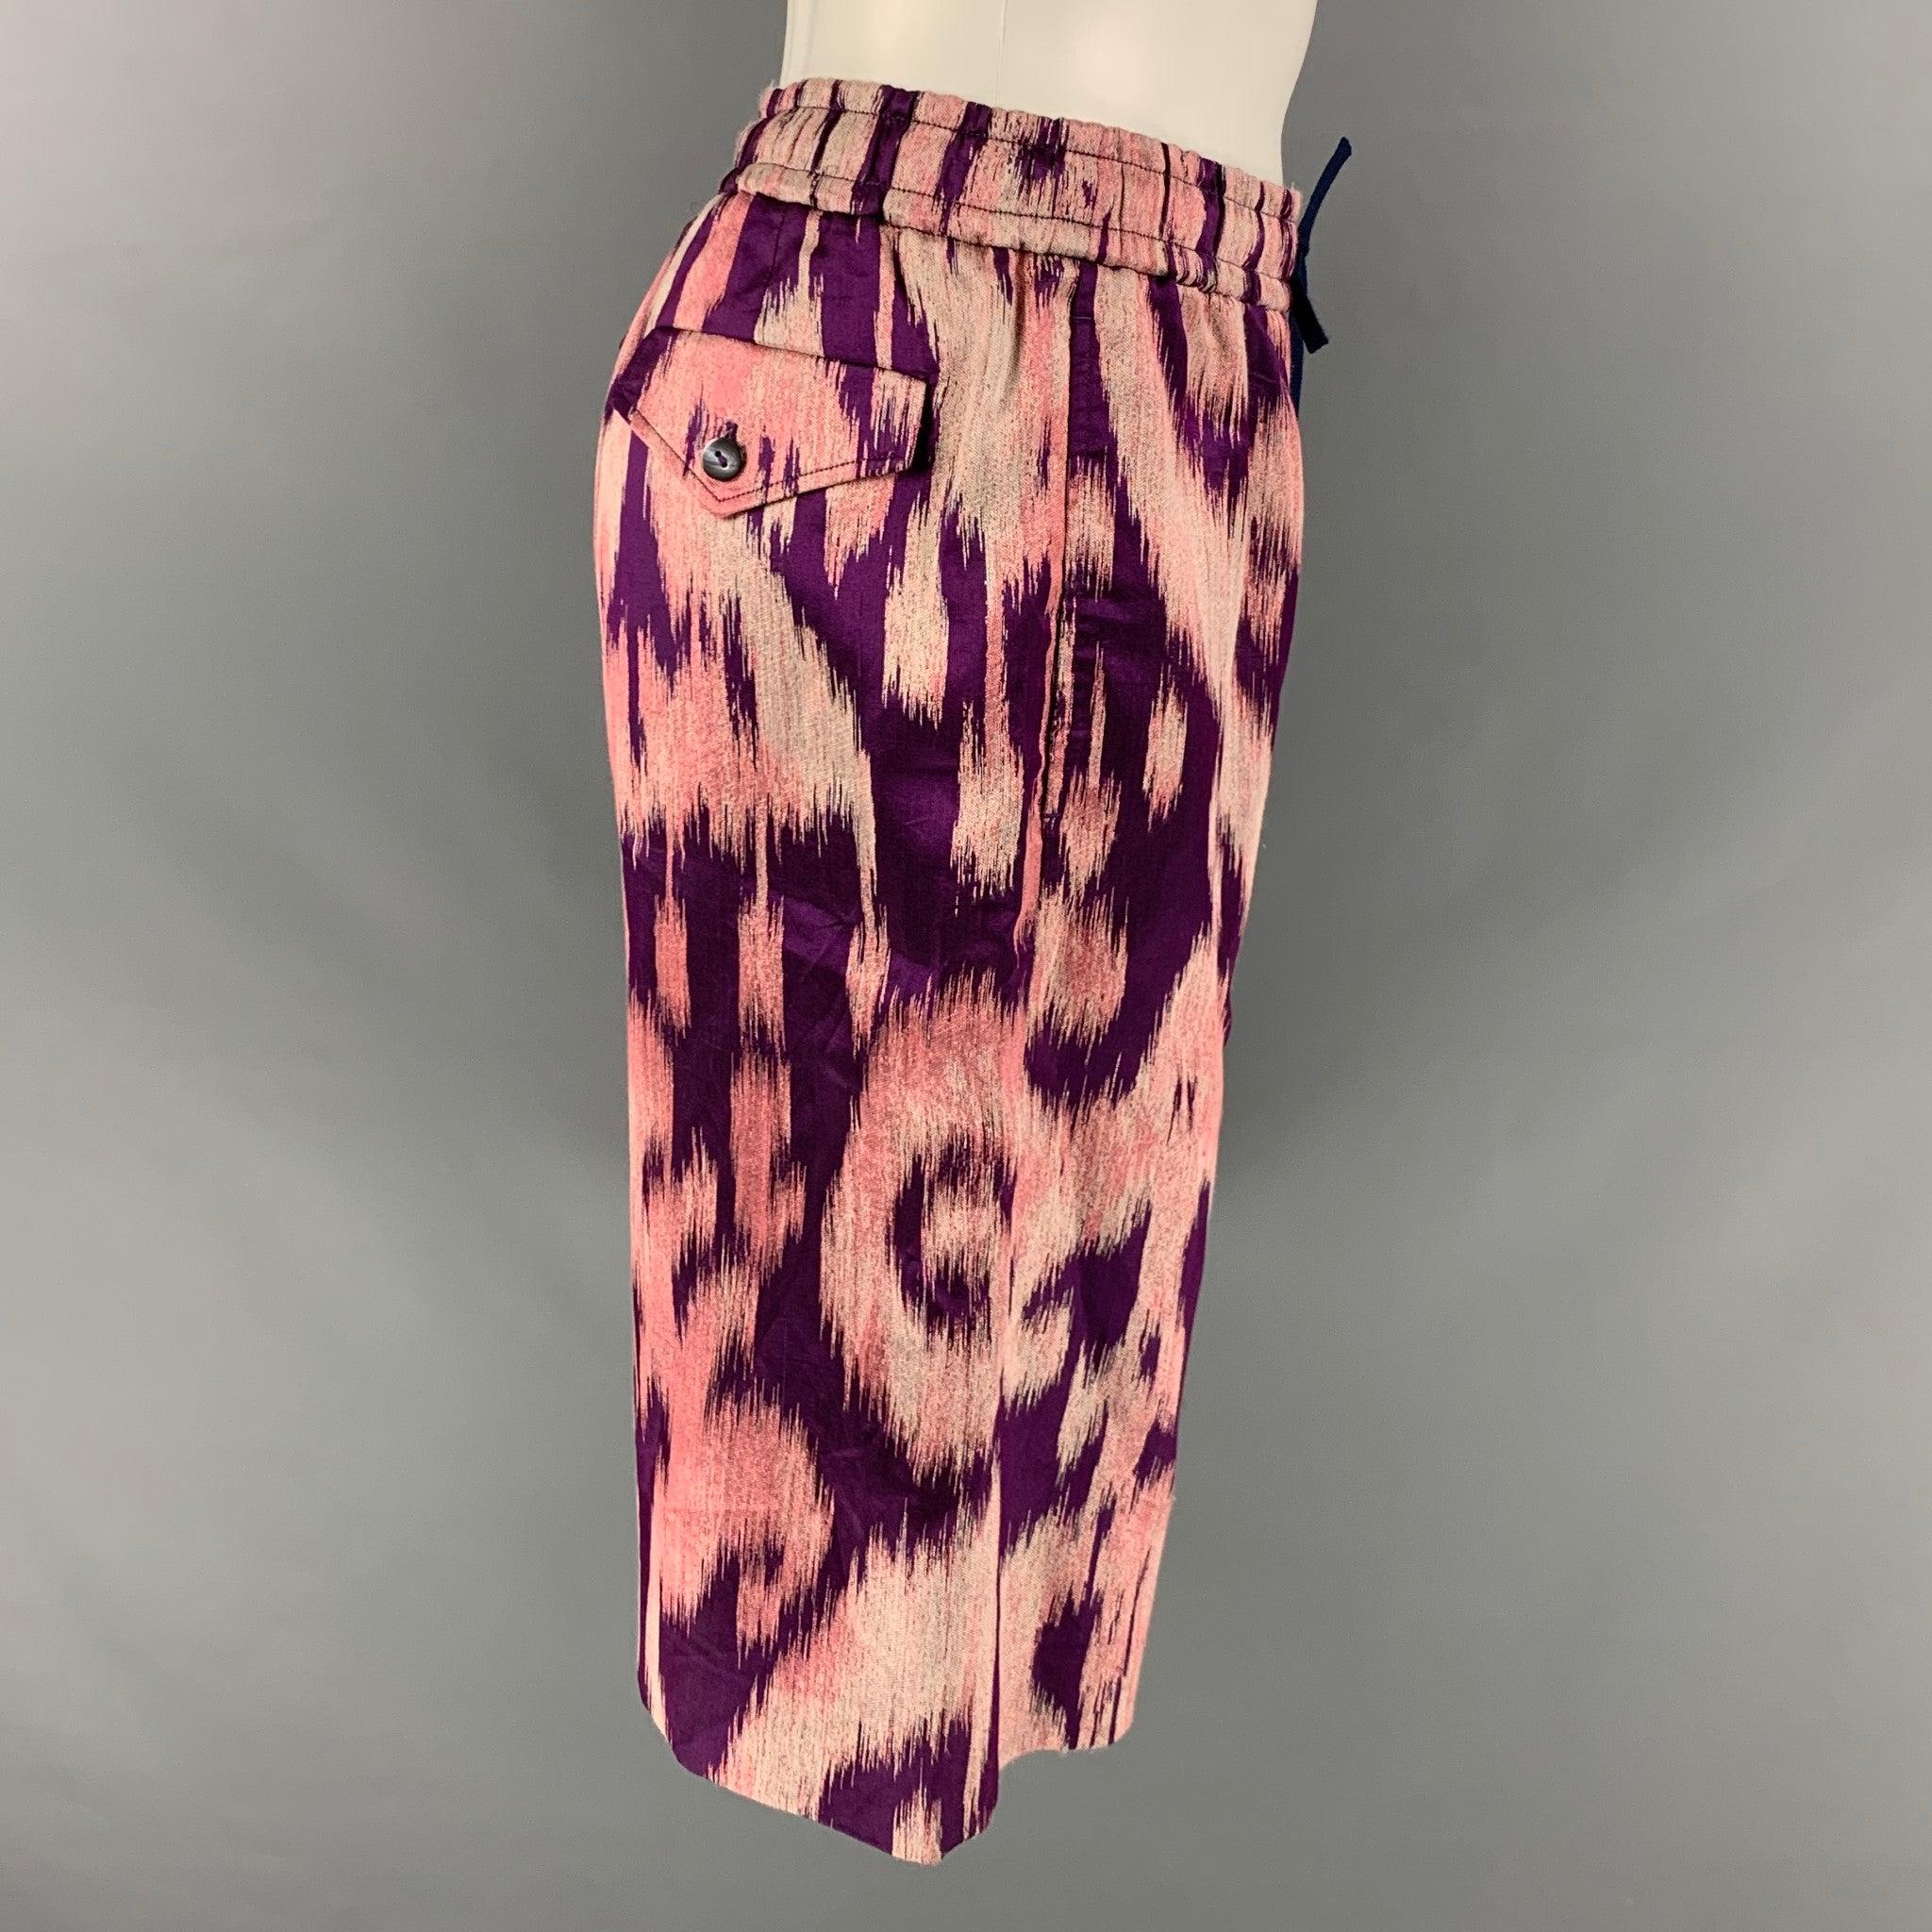 GUCCI shorts comes in pink and purple abstract printed silk jacquard material features a drawstring, Slit Pockets, elastic waist, and zip up fly.
 Made in Italy.Very Good Pre- Owned Condition. 

Marked:   46 

Measurements: 
  Waist: 31 inches Rise: